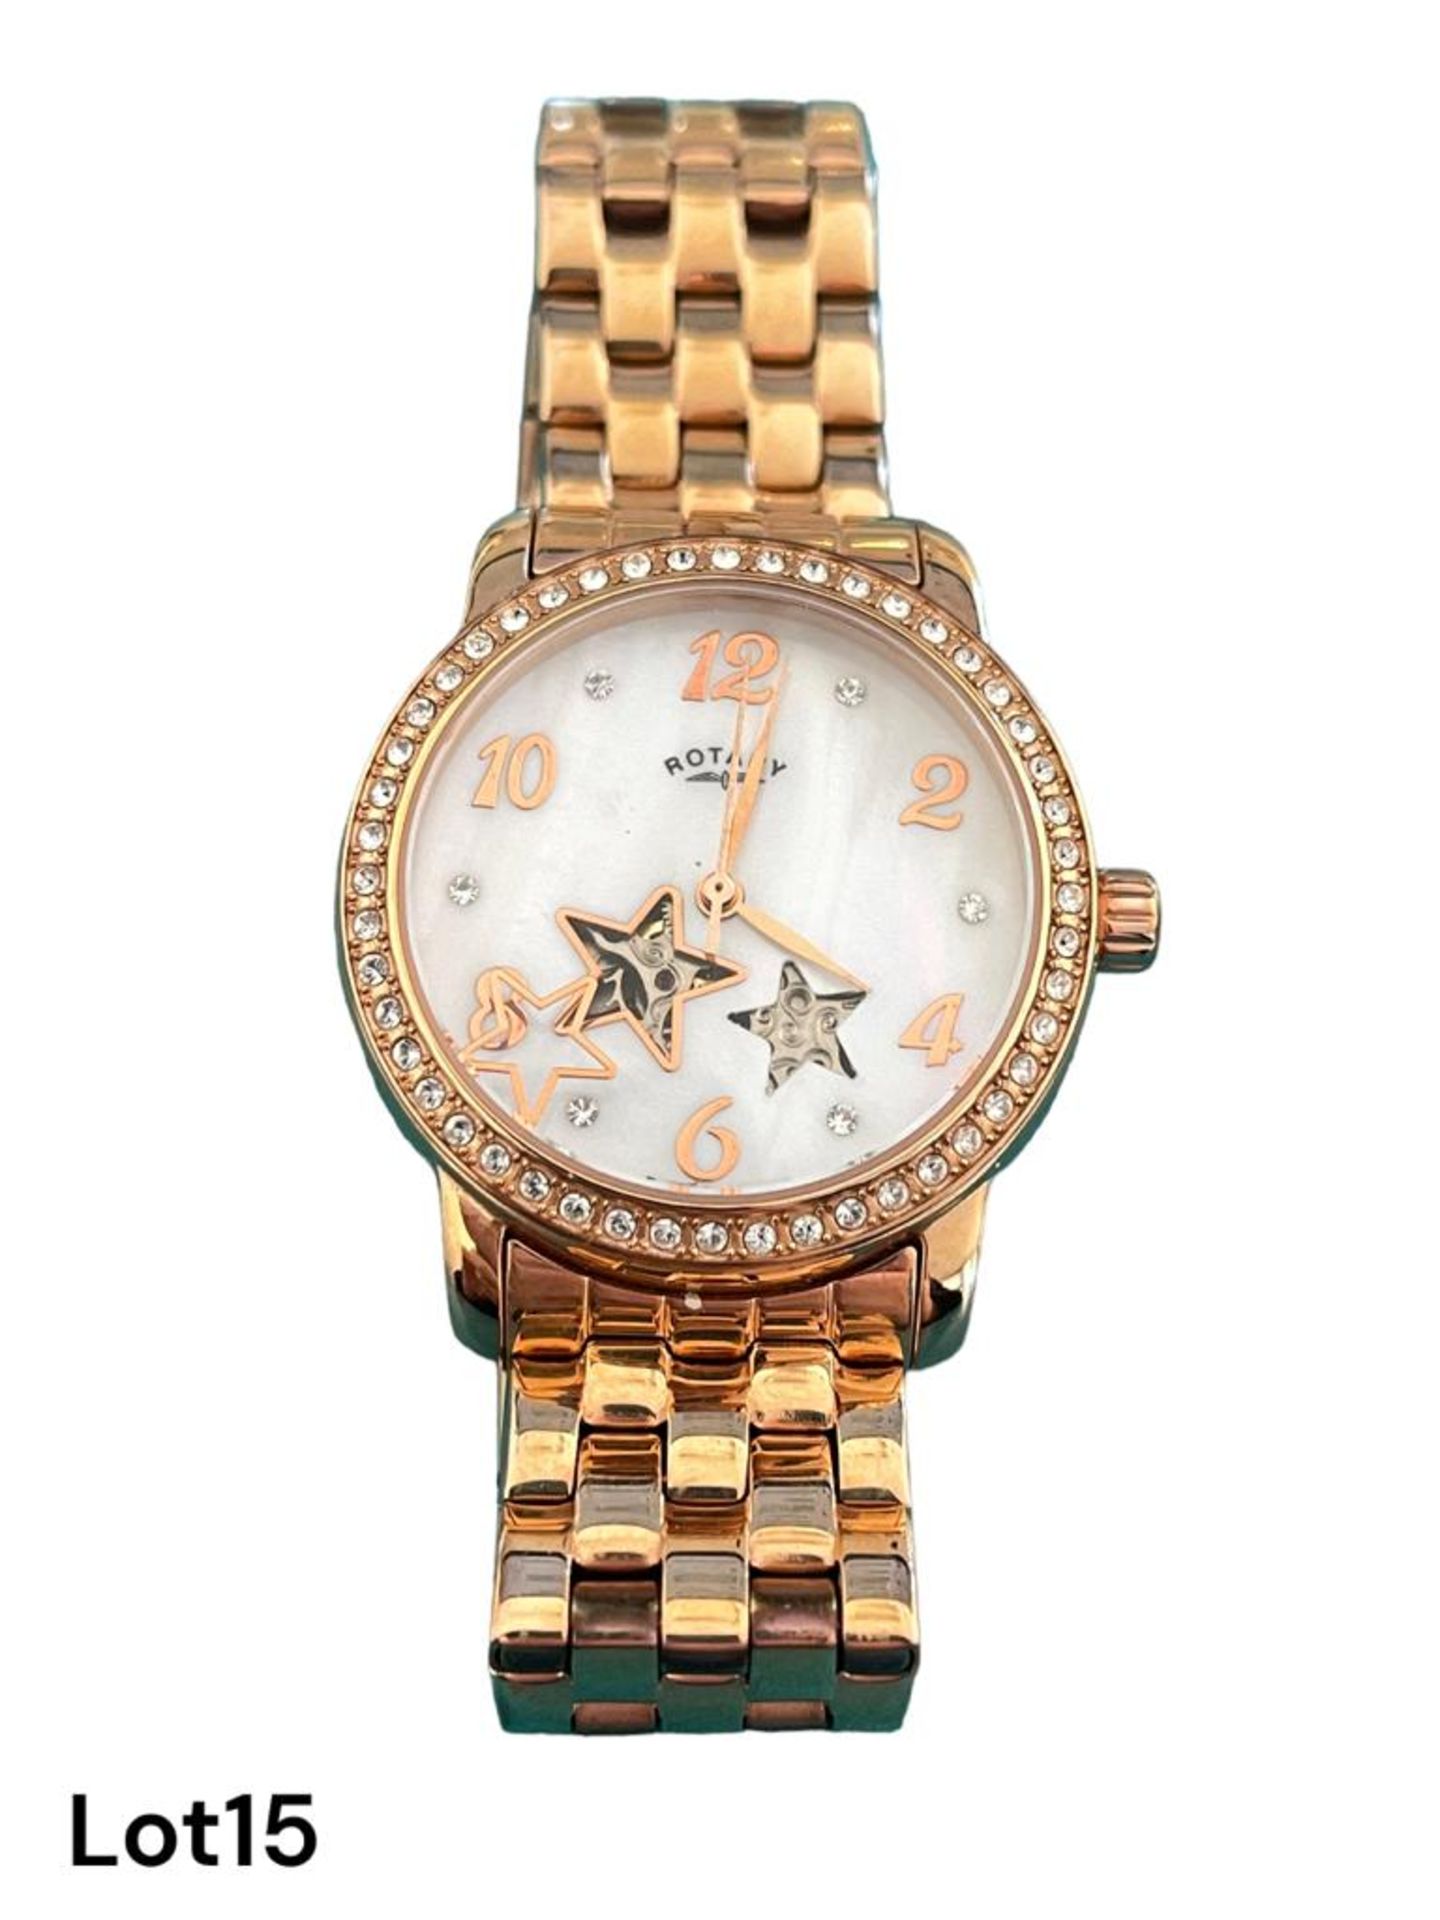 Rotary ladies automatic watch, RETURNS not tested